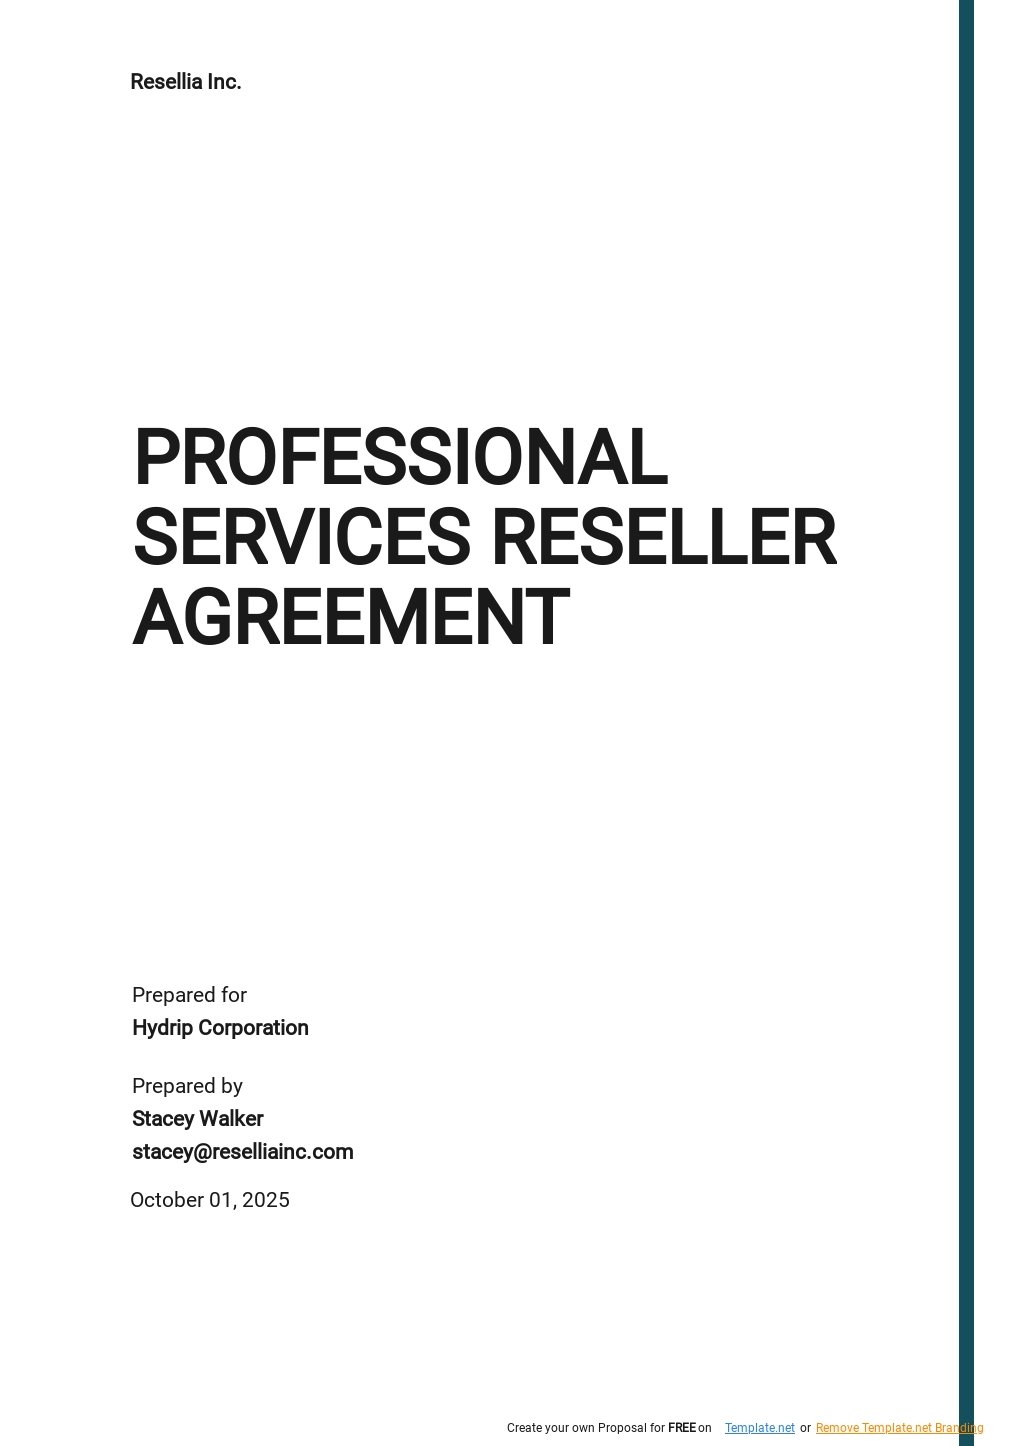 Professional Services Reseller Agreement Template  Template.net Throughout saas reseller agreement template